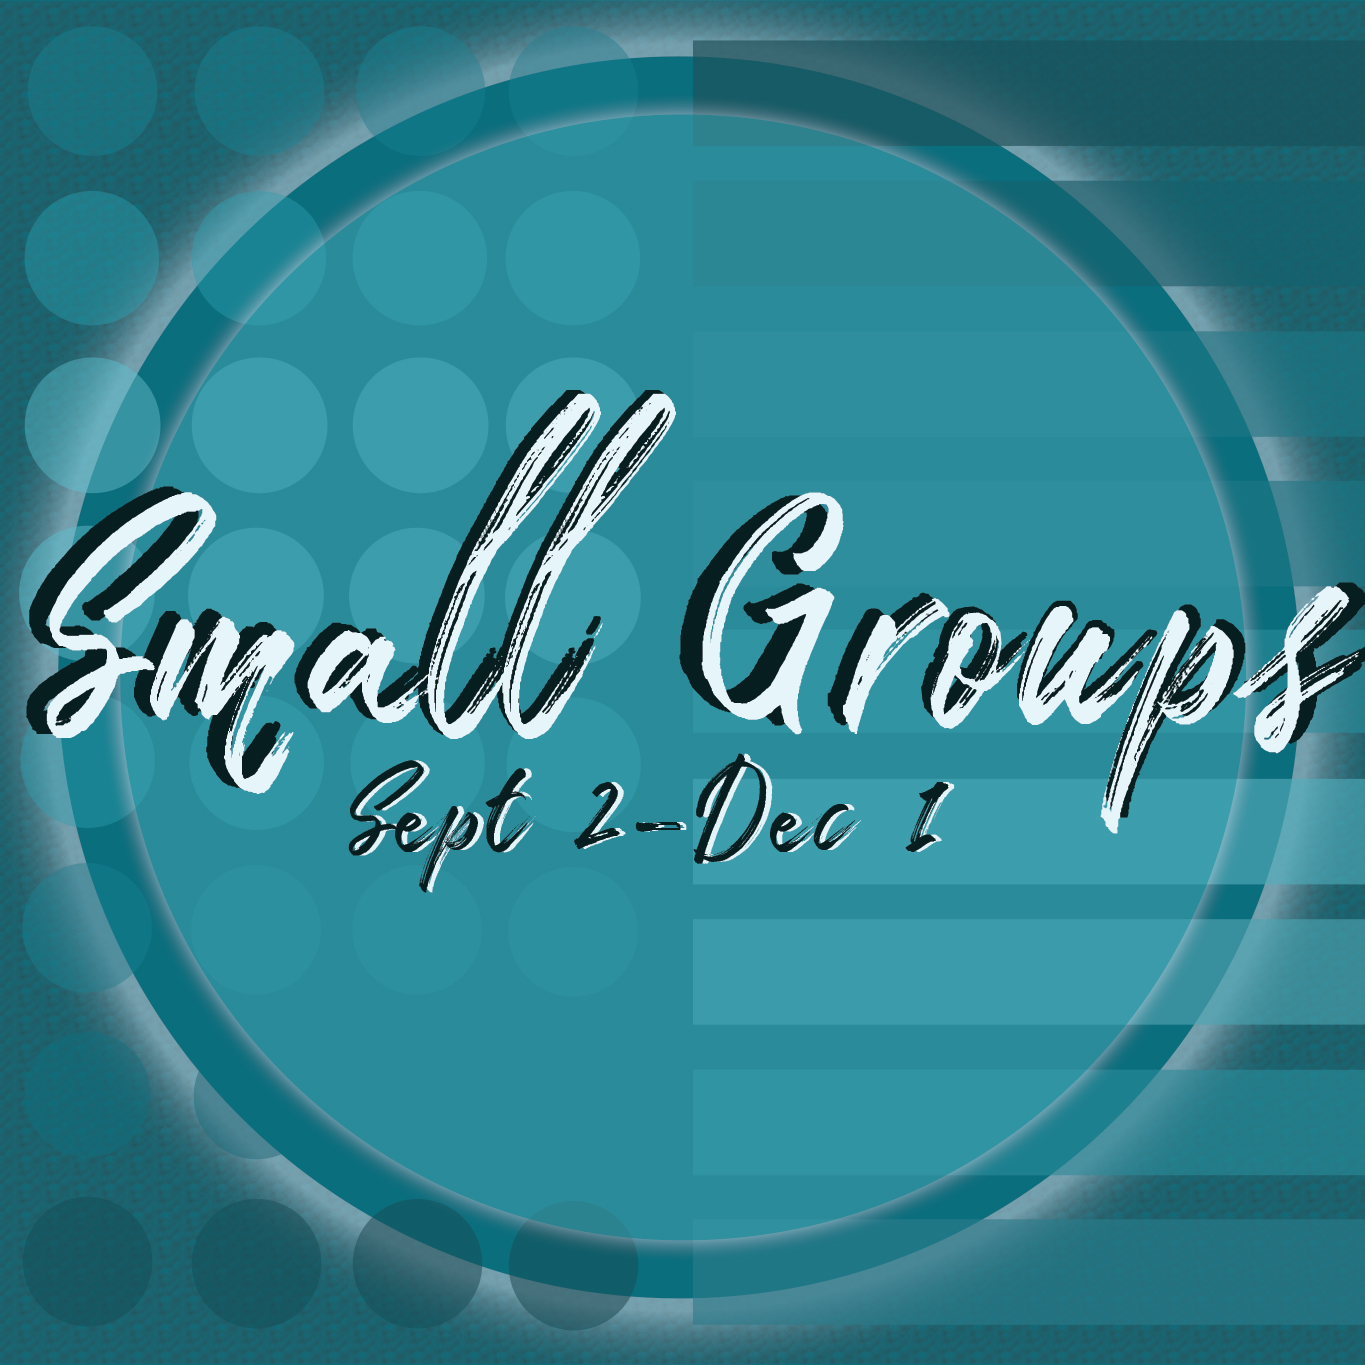 Fall 2018 Small Groups